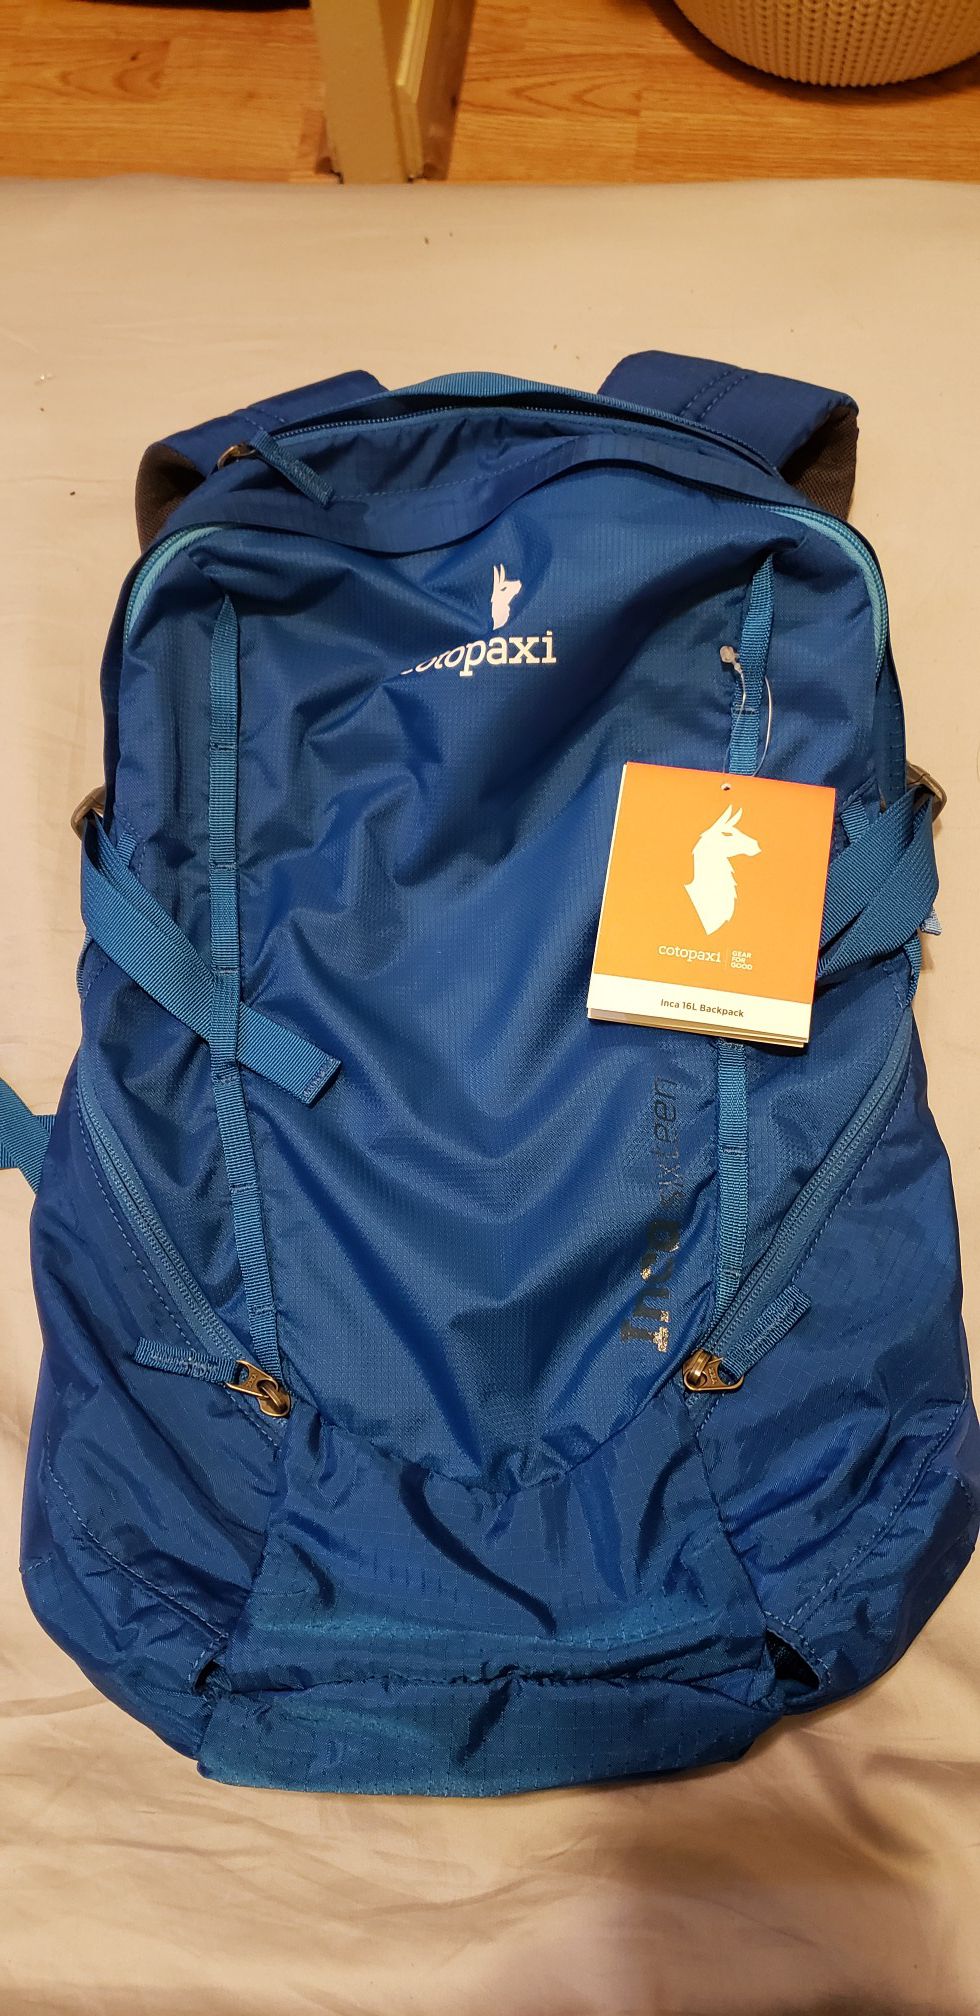 NEWCotopaxi Inca 16L daypack